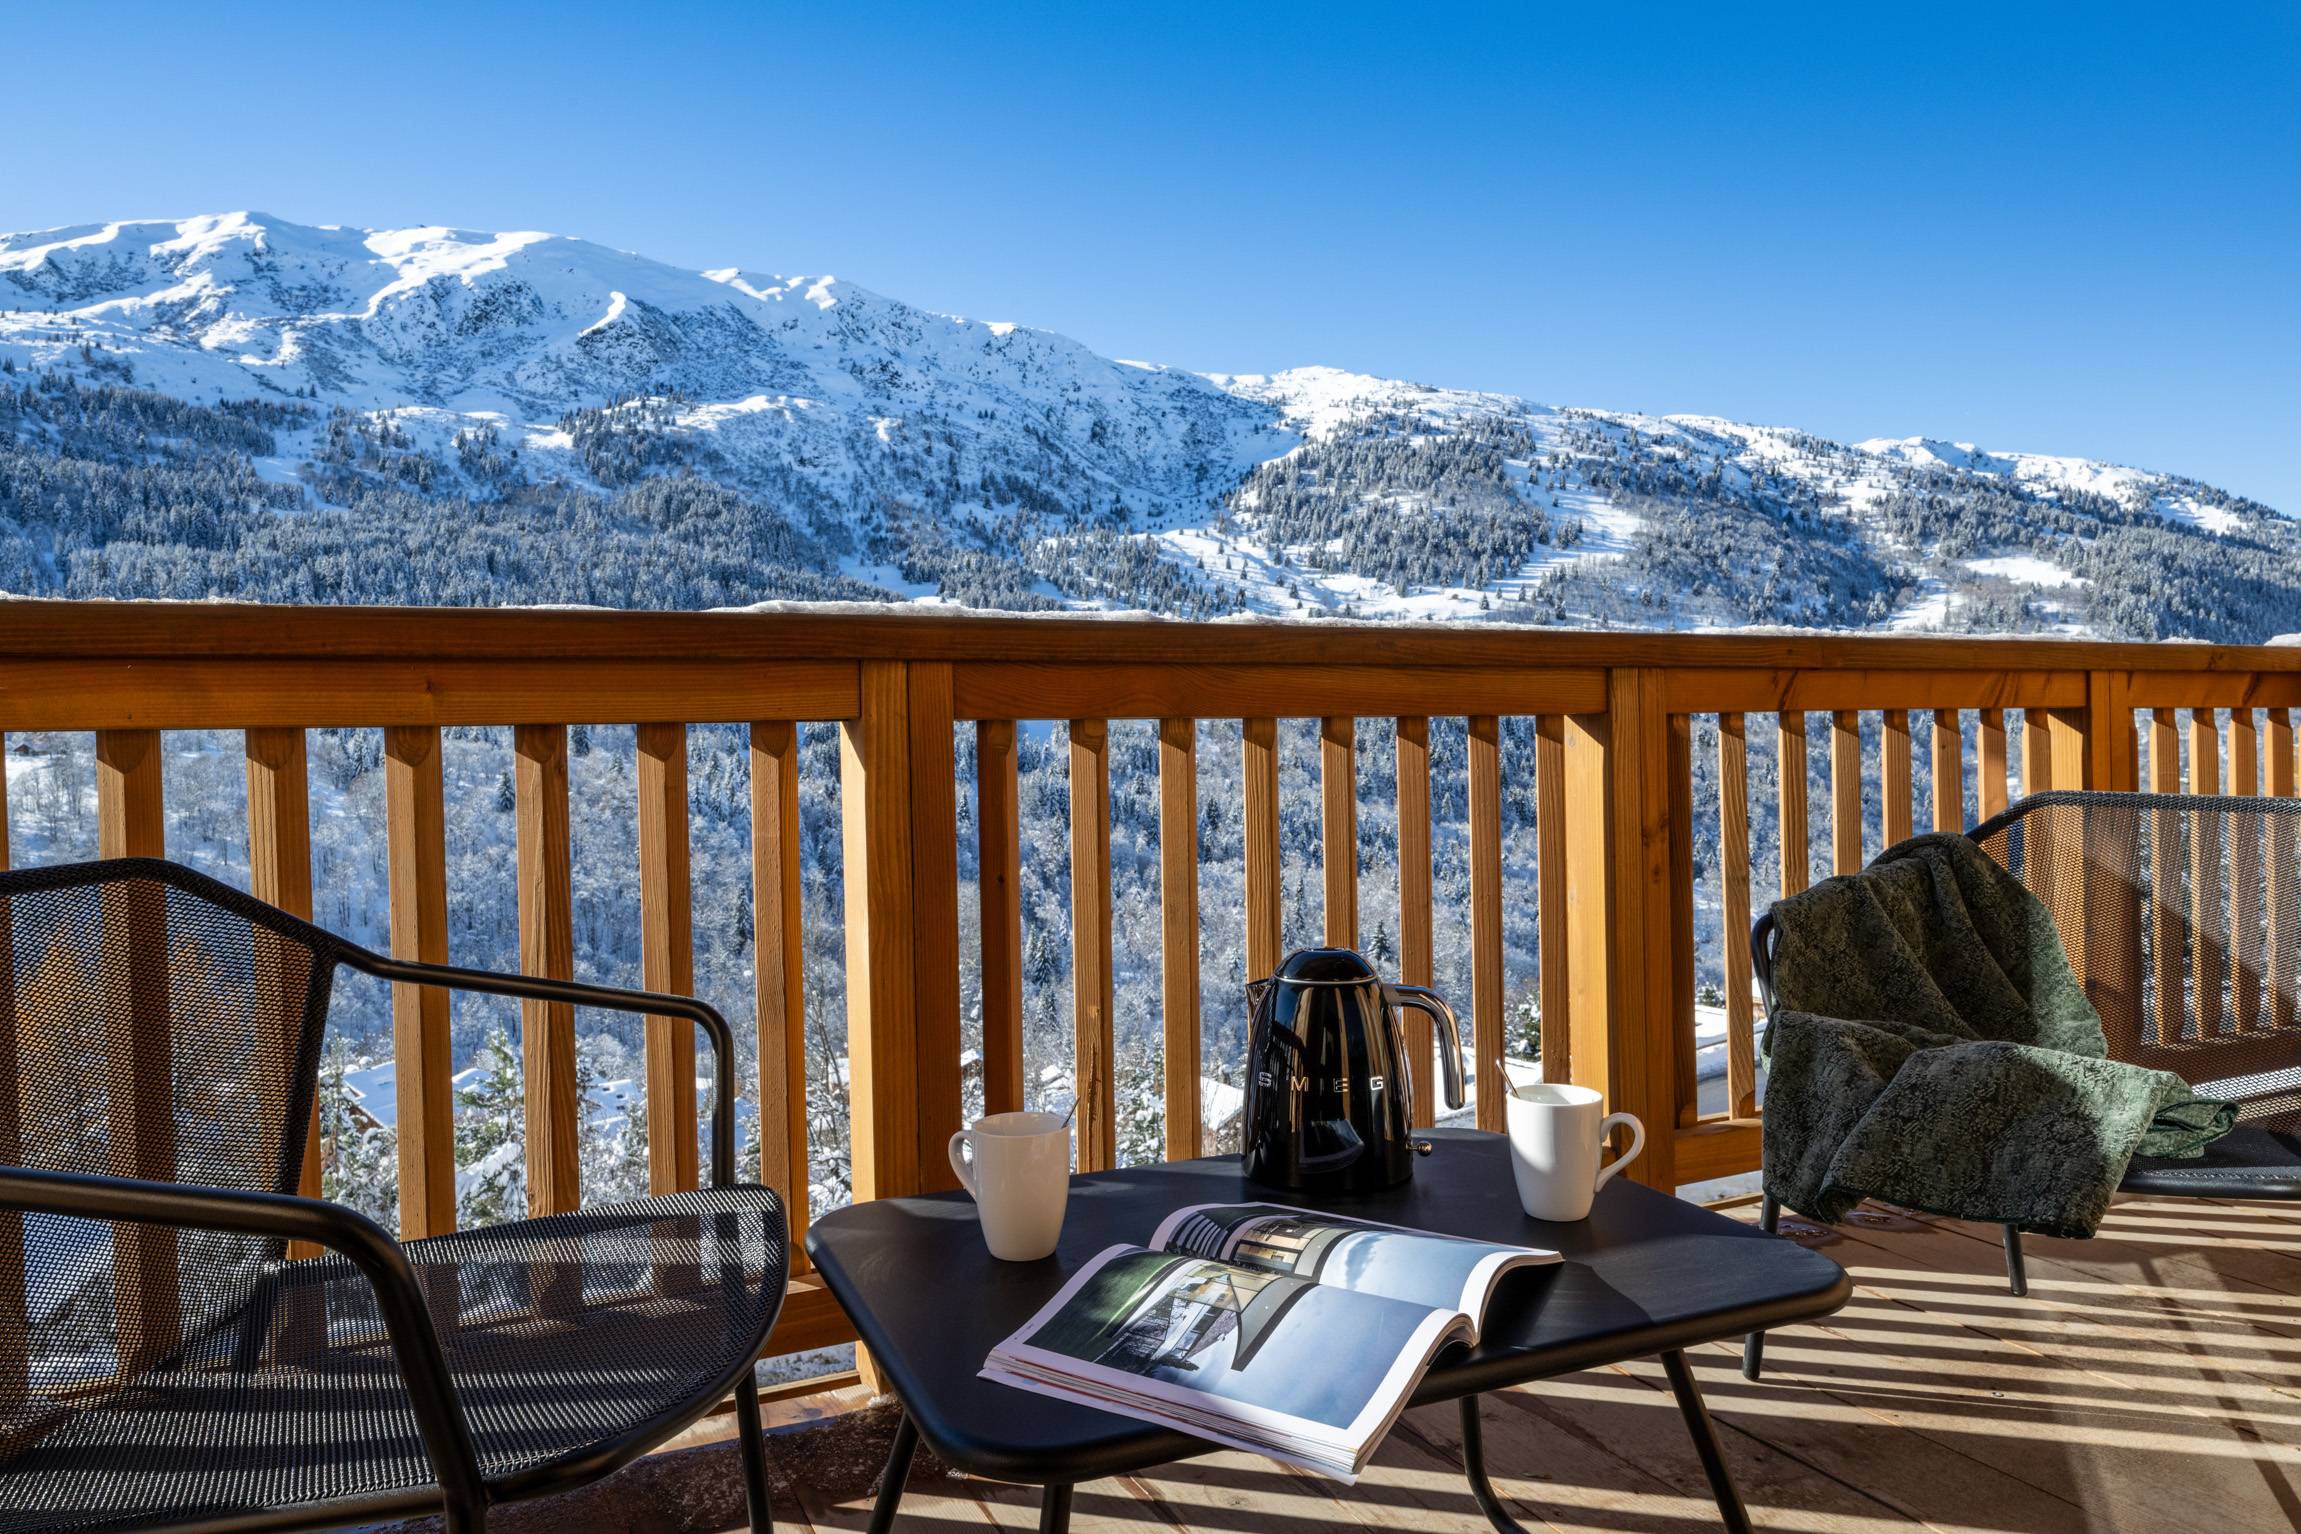 Welcoming Alpine Retreat in Meribel Three Valleys with Stunning Views and a Hot Tub on the Terrace